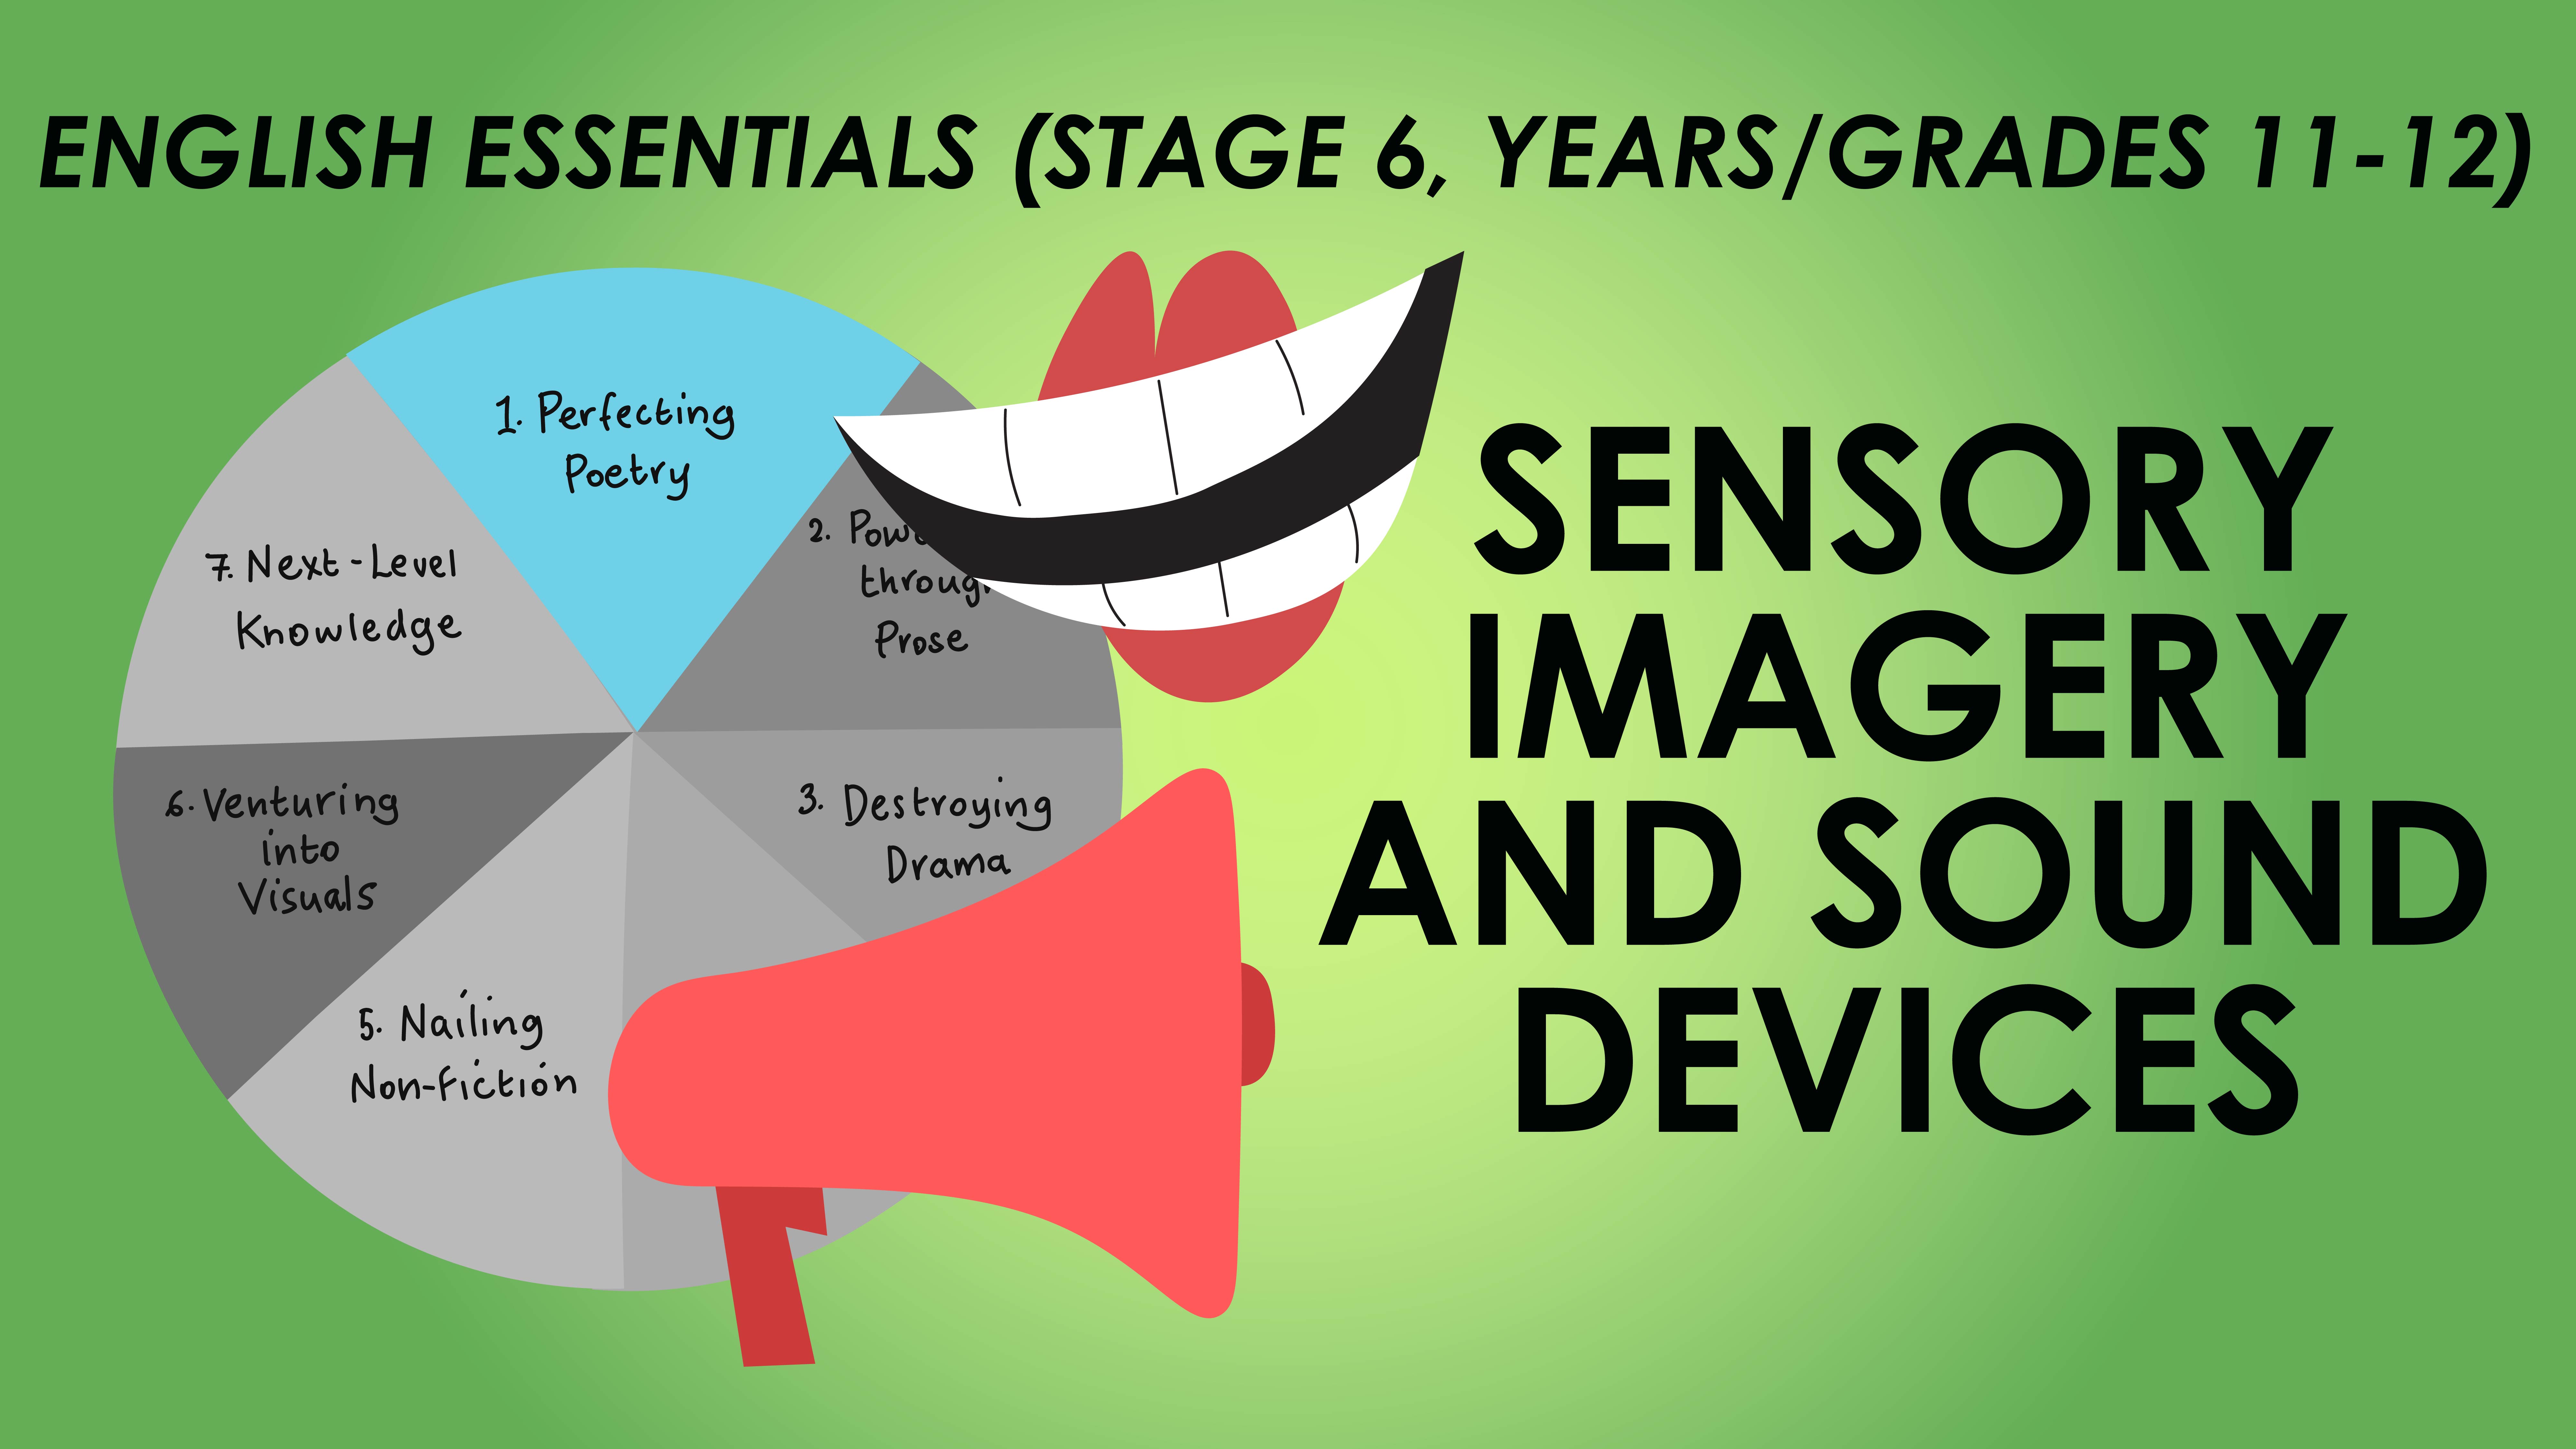 English Essentials - Perfecting Poetry - Sensory Imagery and Sound Devices (Stage 6, Years/Grades 11-12)